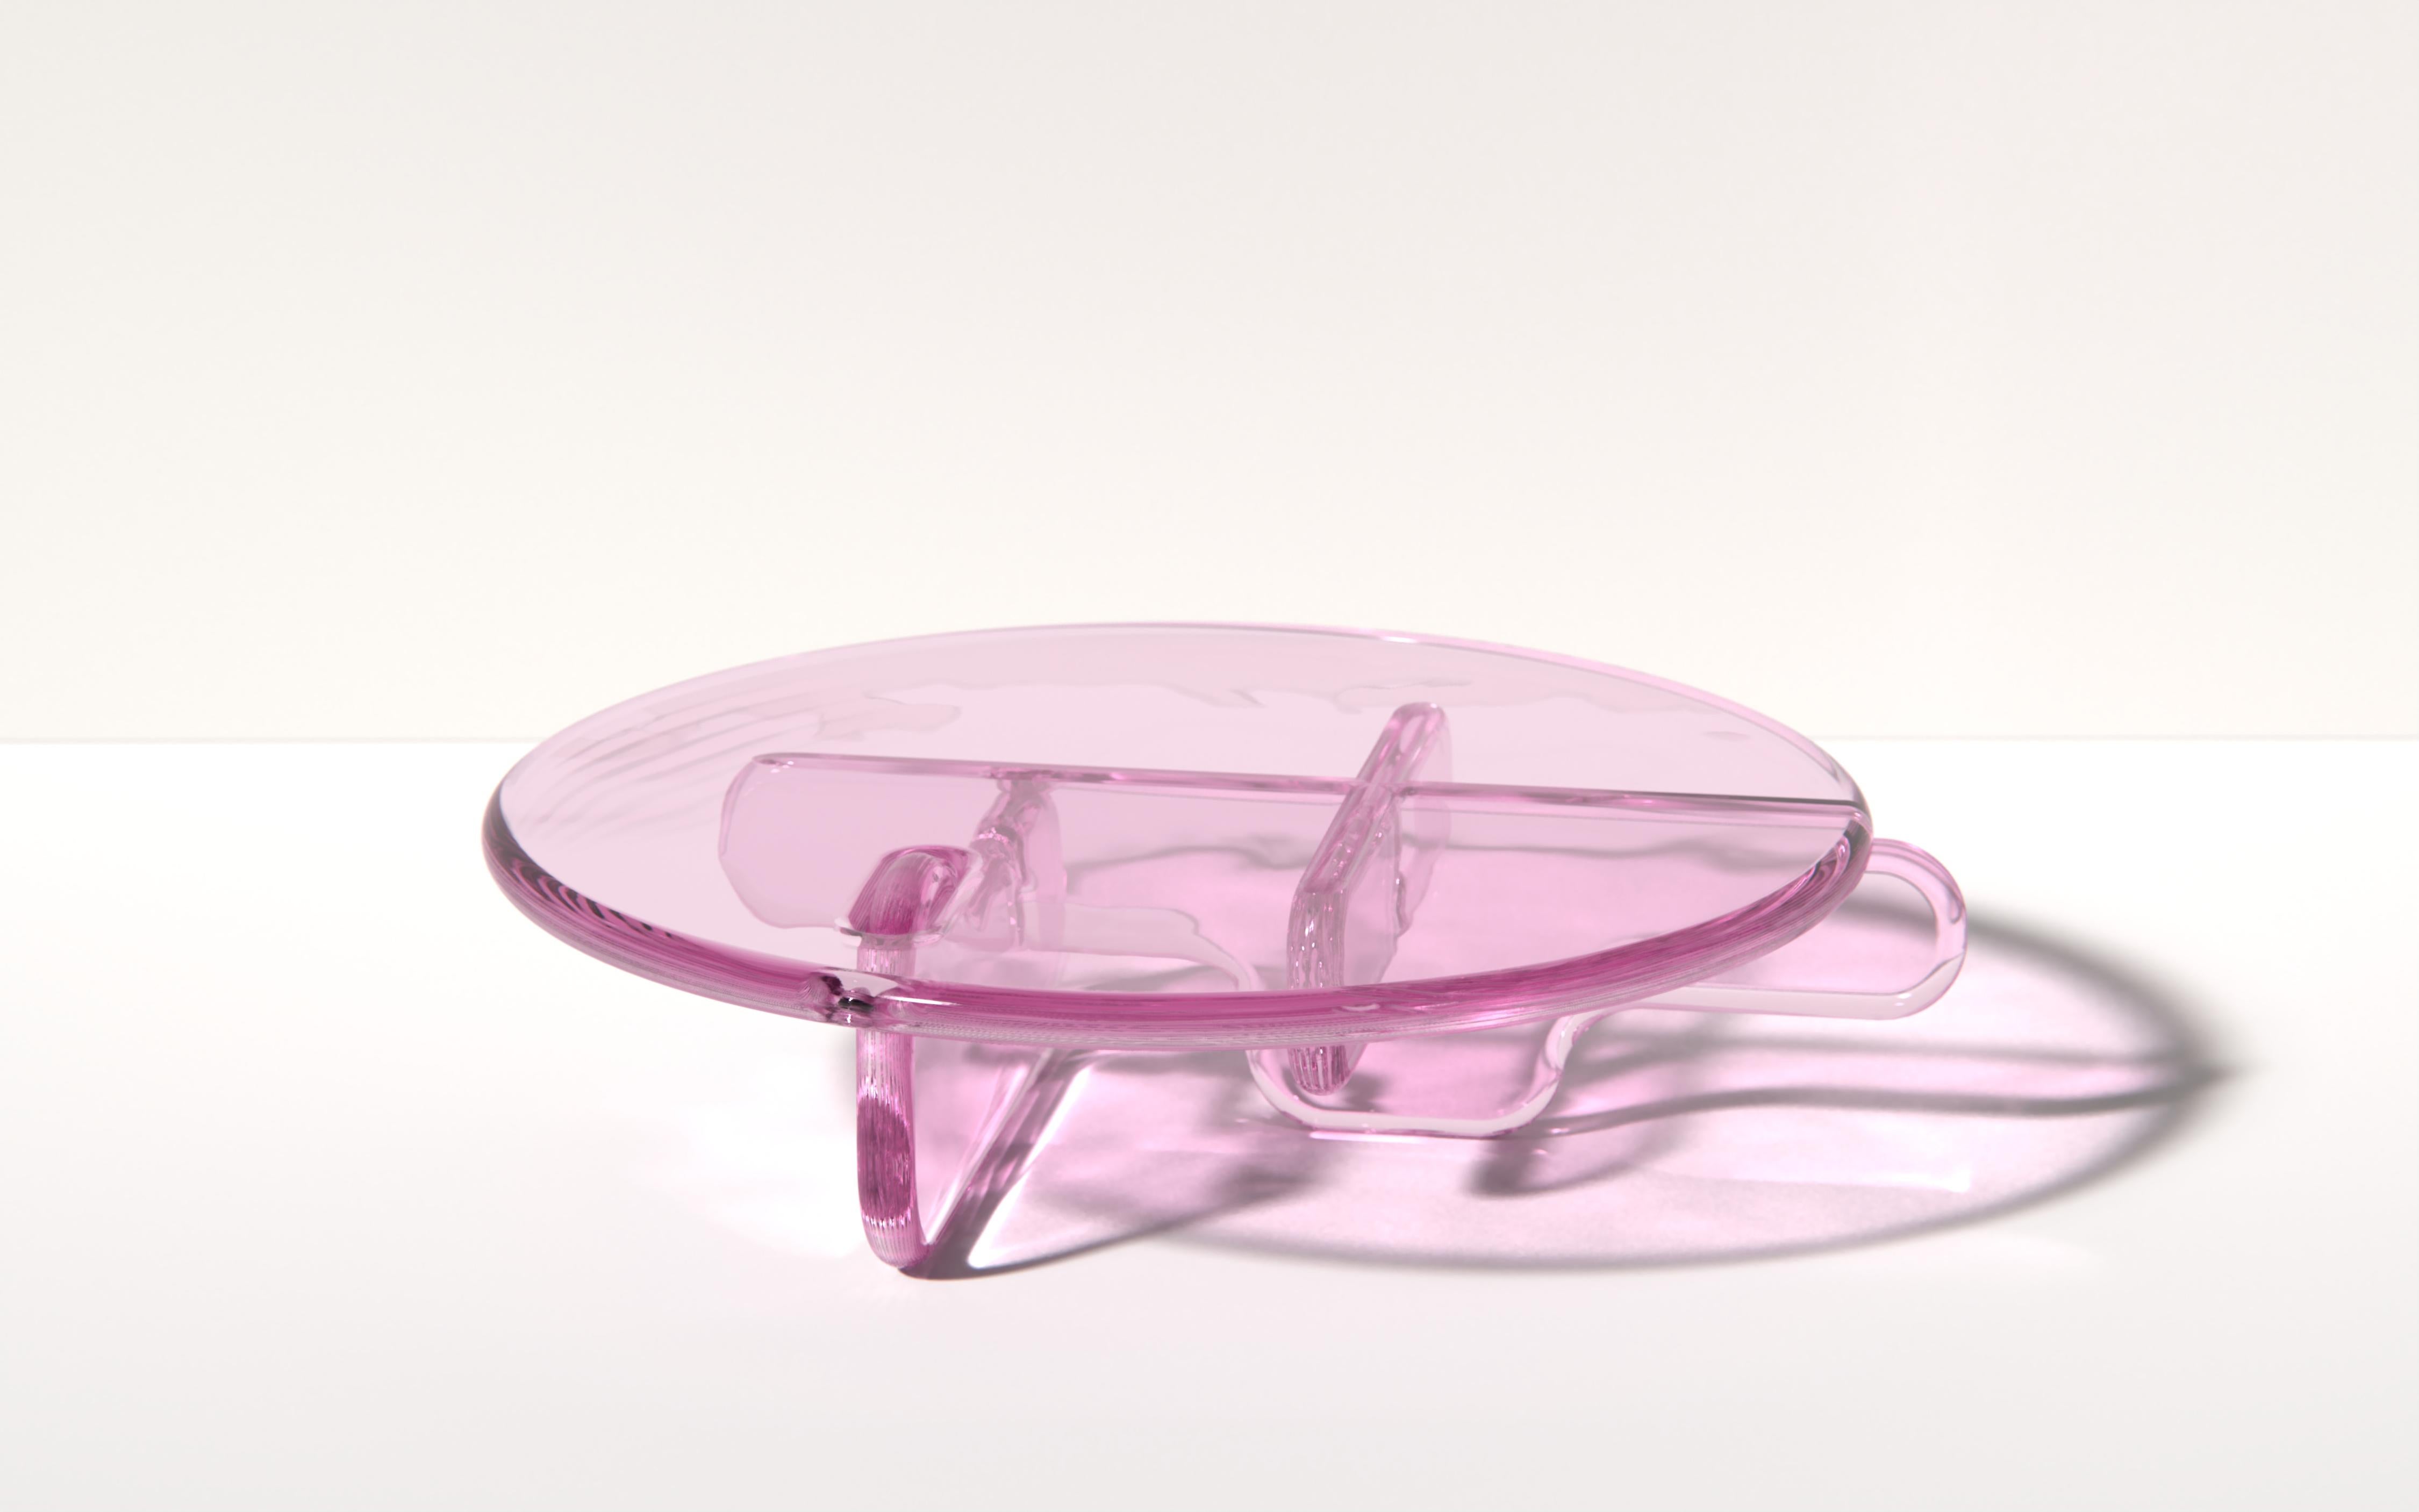 A continuation of the Plump series of sculptural furniture. The shapes play upon the effect that resin has as light is refracted through the solid parts. The table is only held together through notches at each joint. There are no glues or